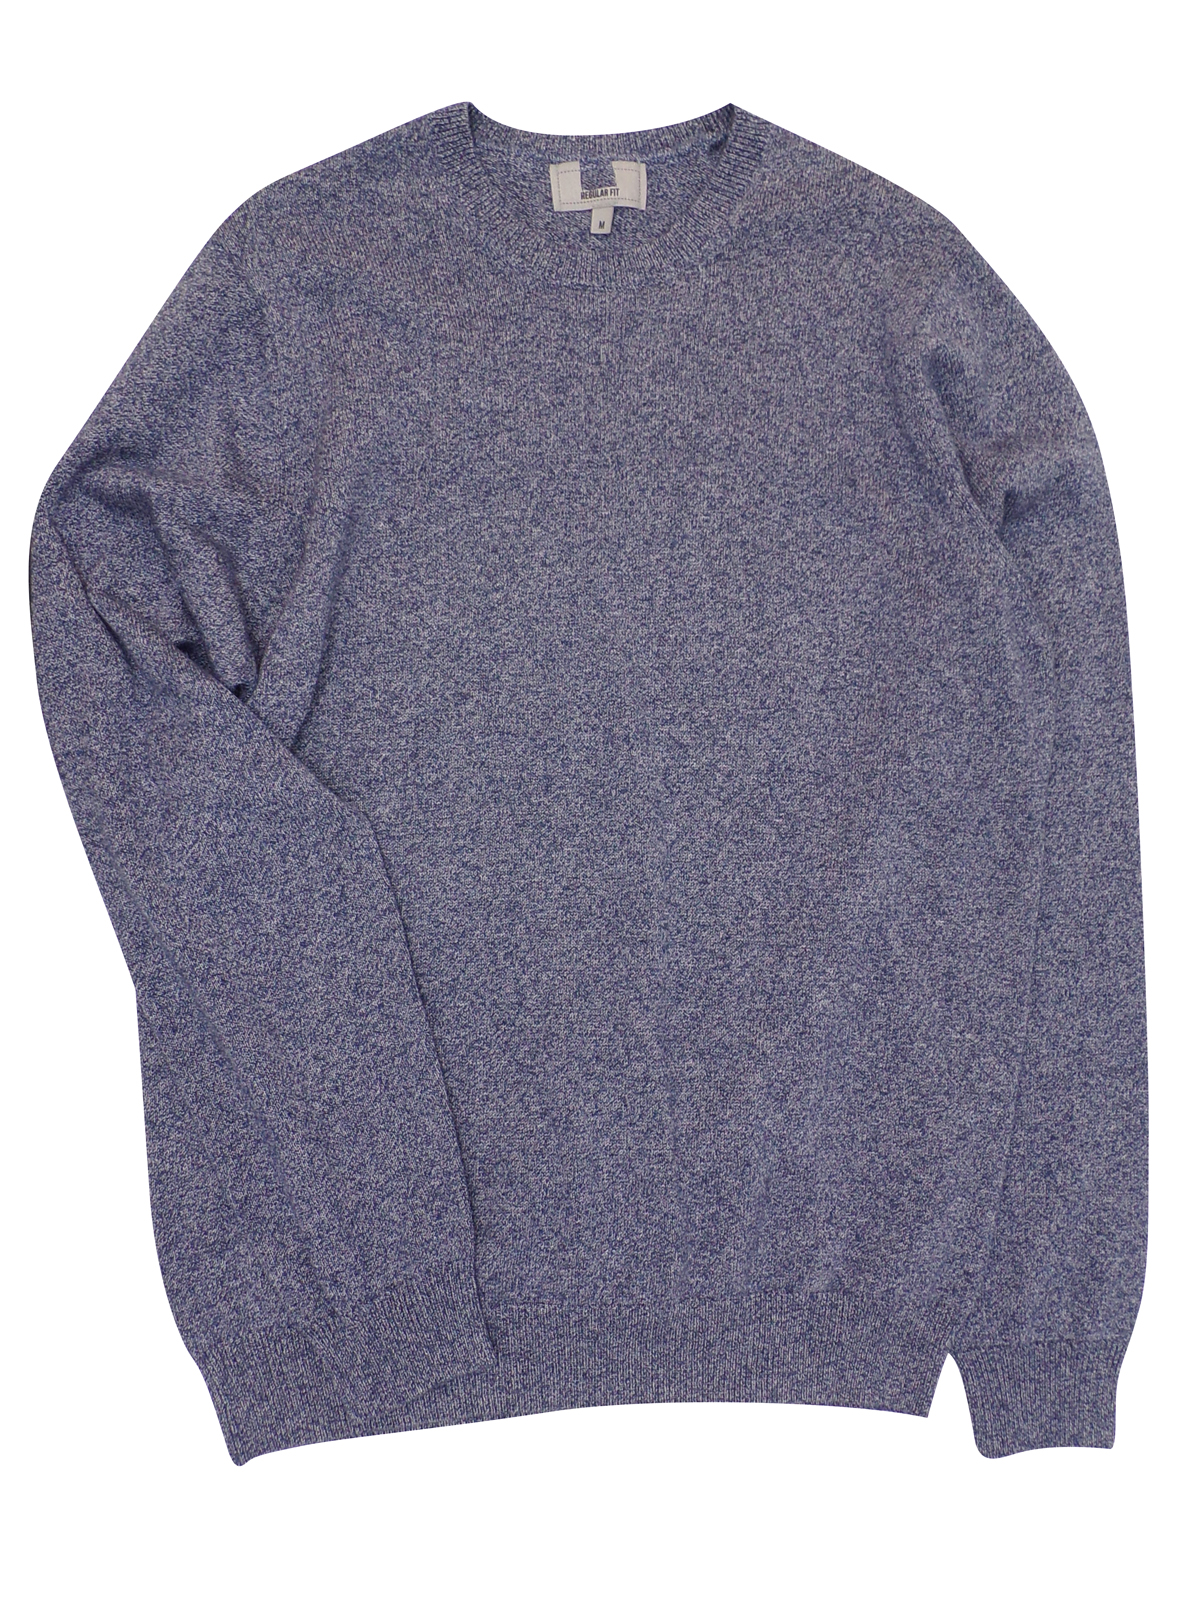 Marks and Spencer - - M&5 DENIM Pure Cotton Long Sleeve Jumper - Size ...